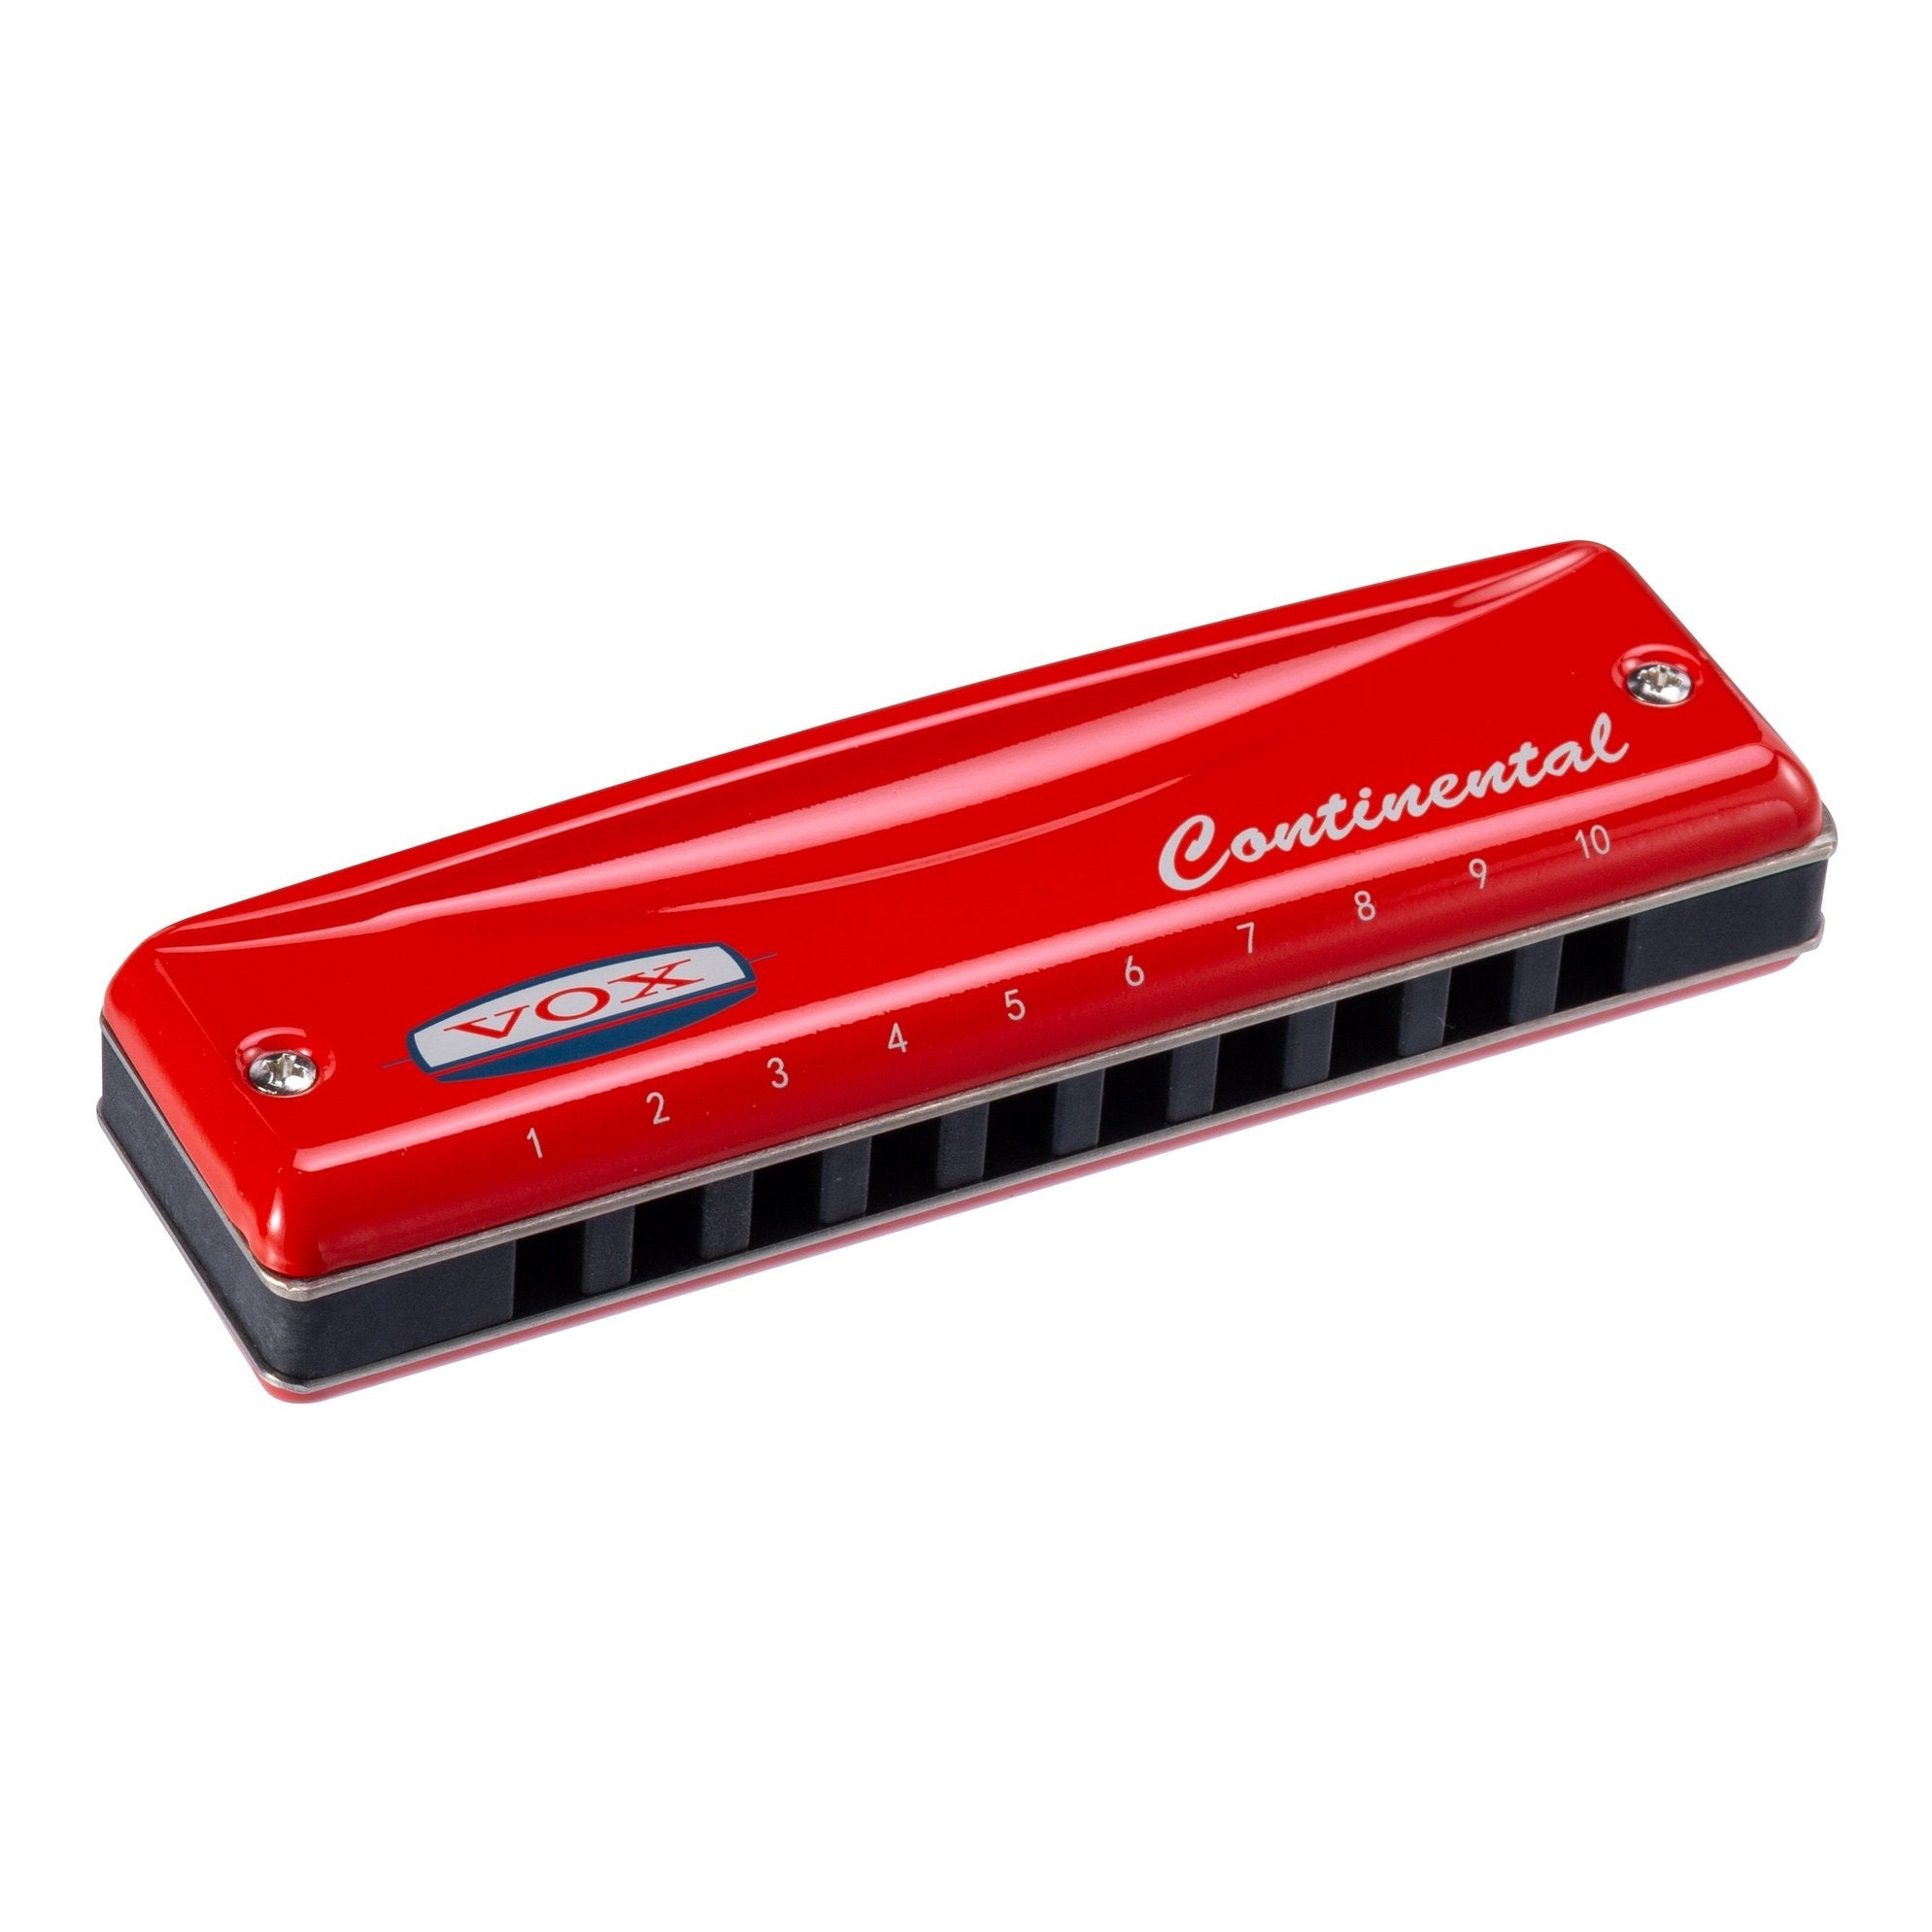 Vox Continental Harmonica - Key of A 2